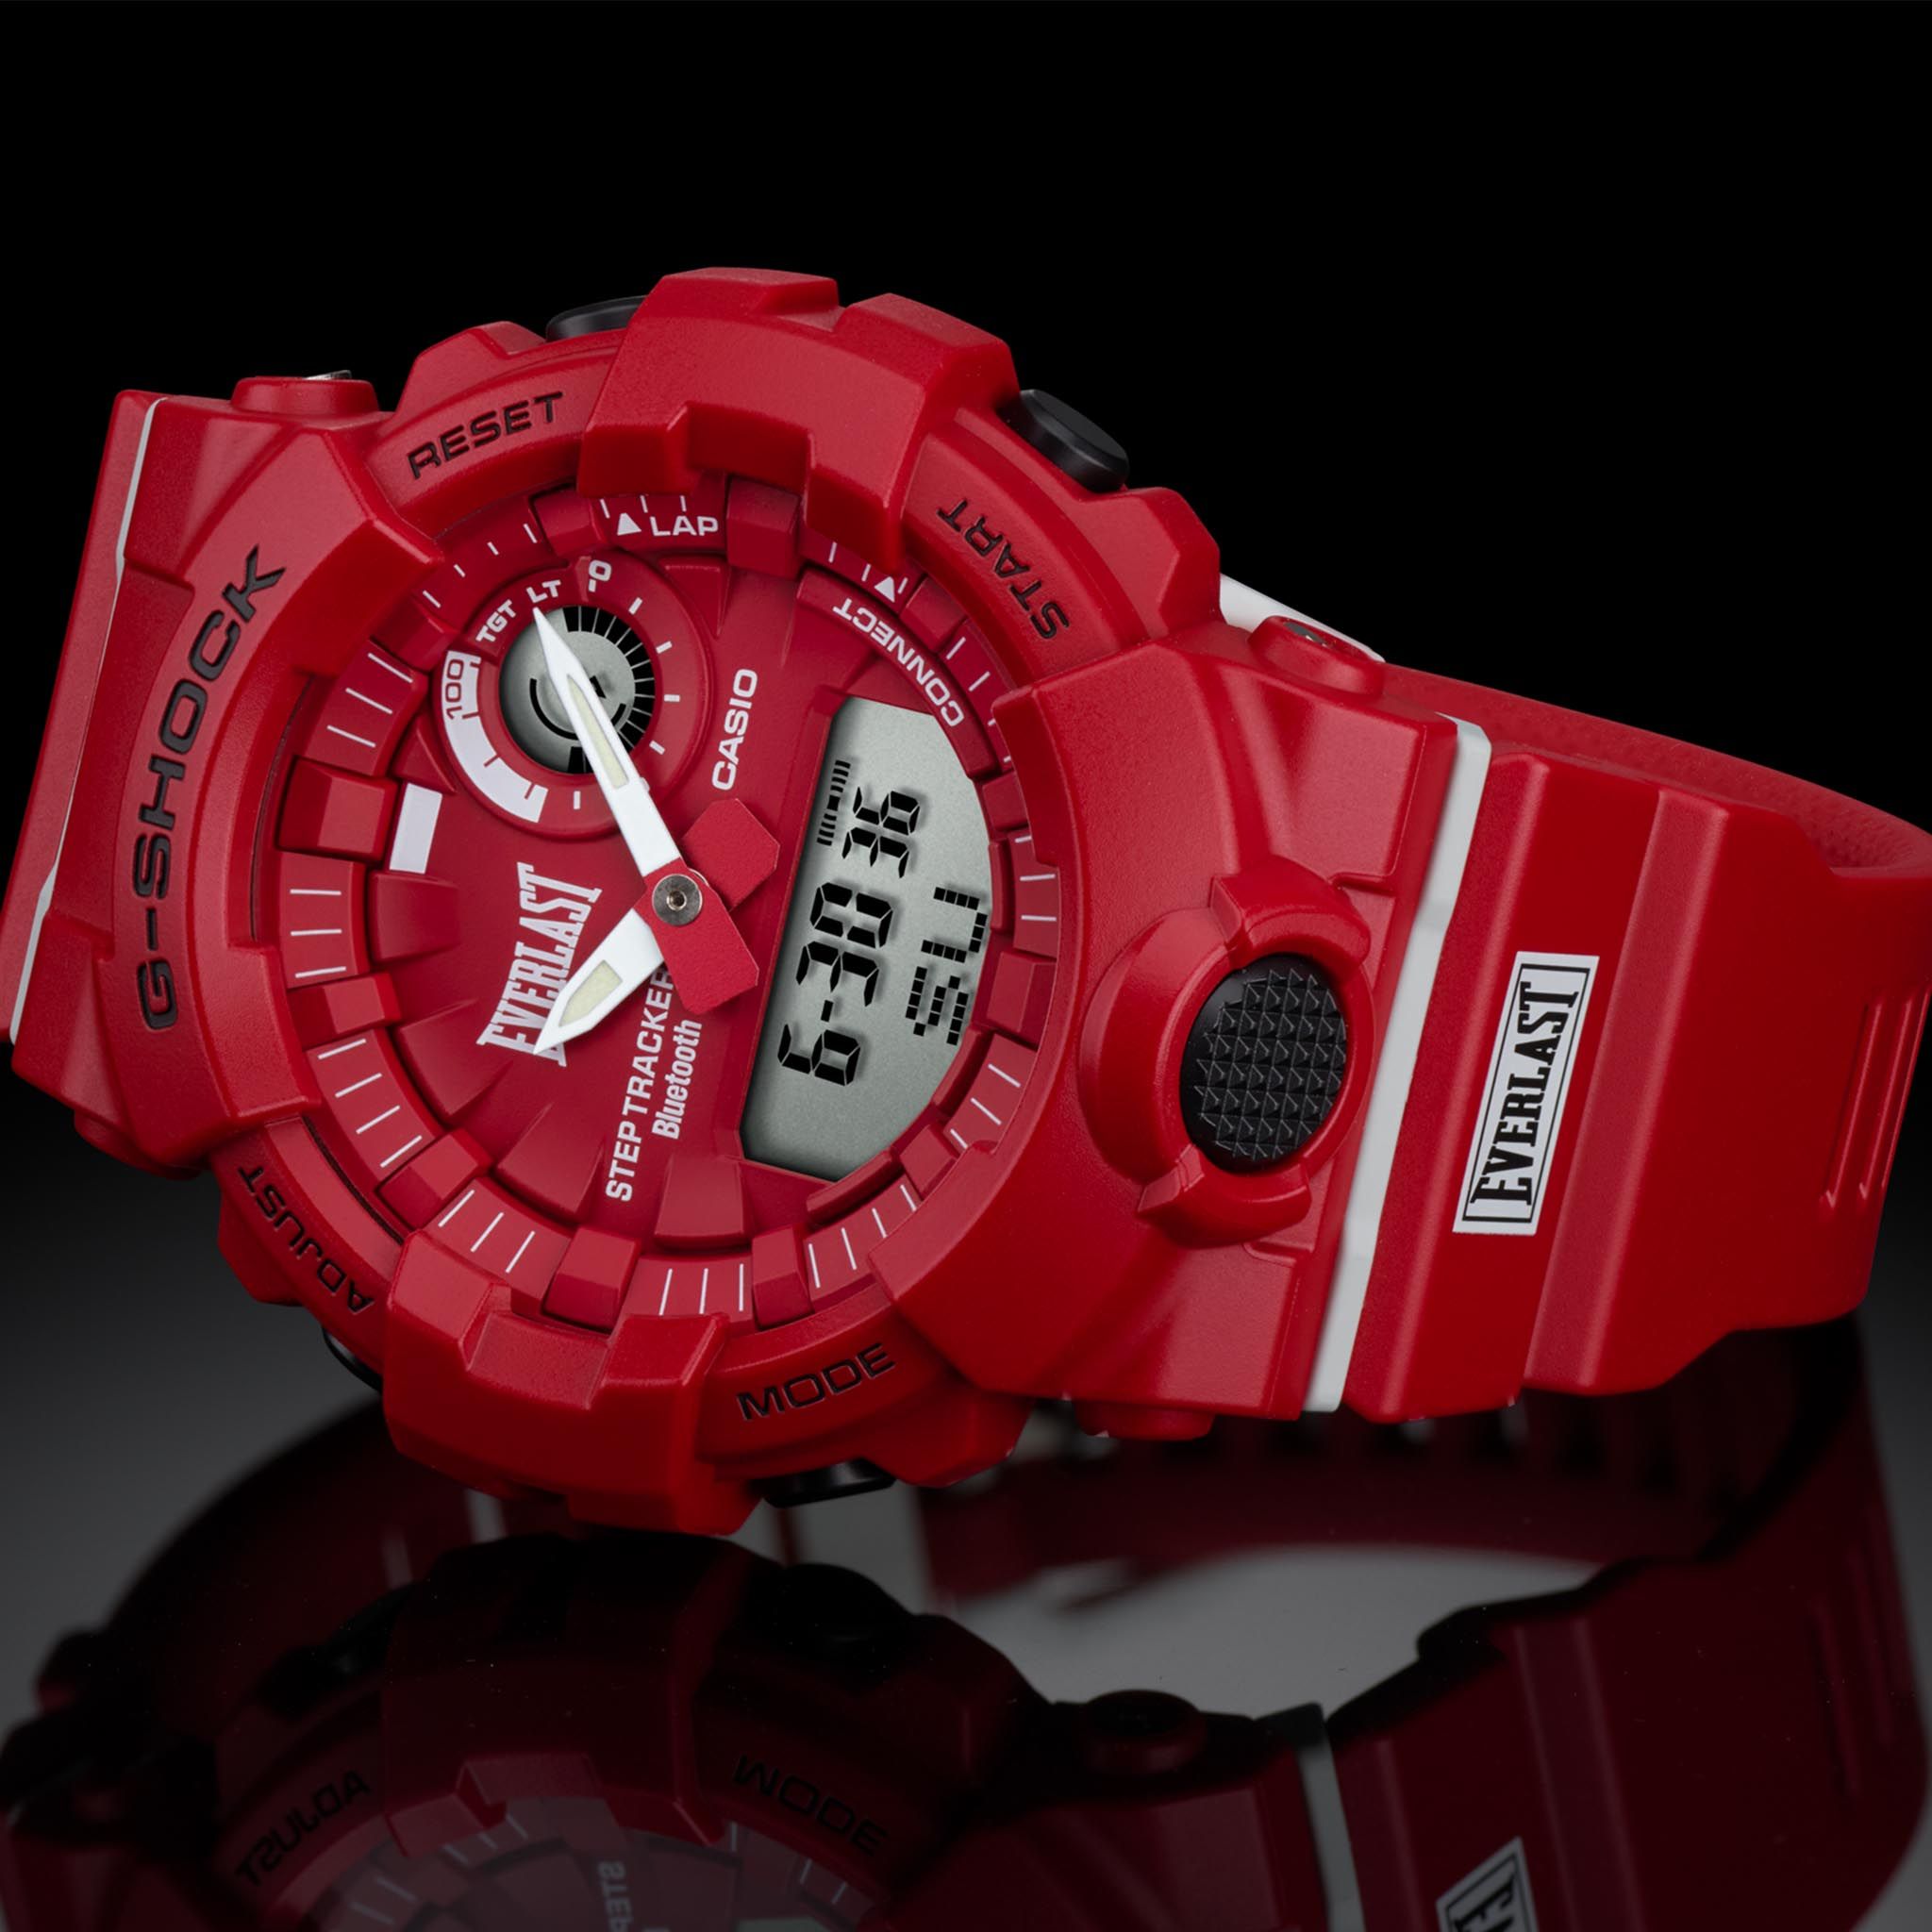 Casio G Shock Unveils Collabortive Fitness Timepiece With Legendary Boxing Brand Everlast